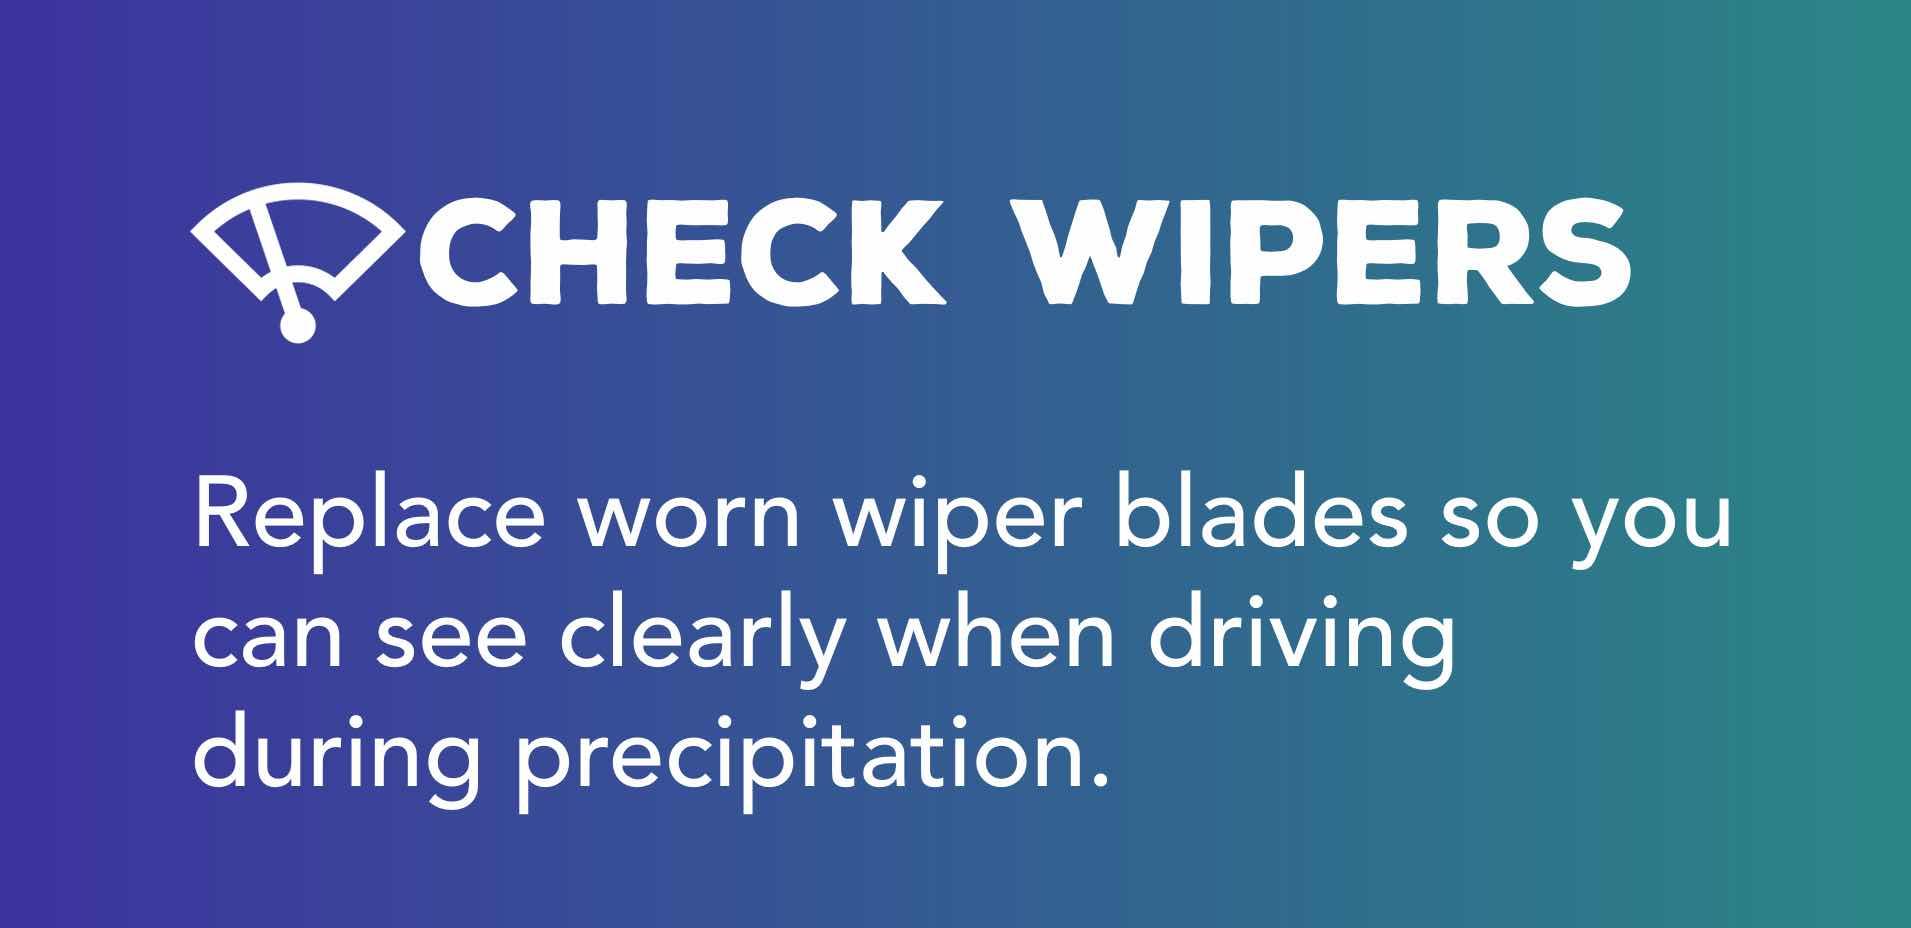 Replace worn wiper blades so you can see clearly when driving during precipitation.